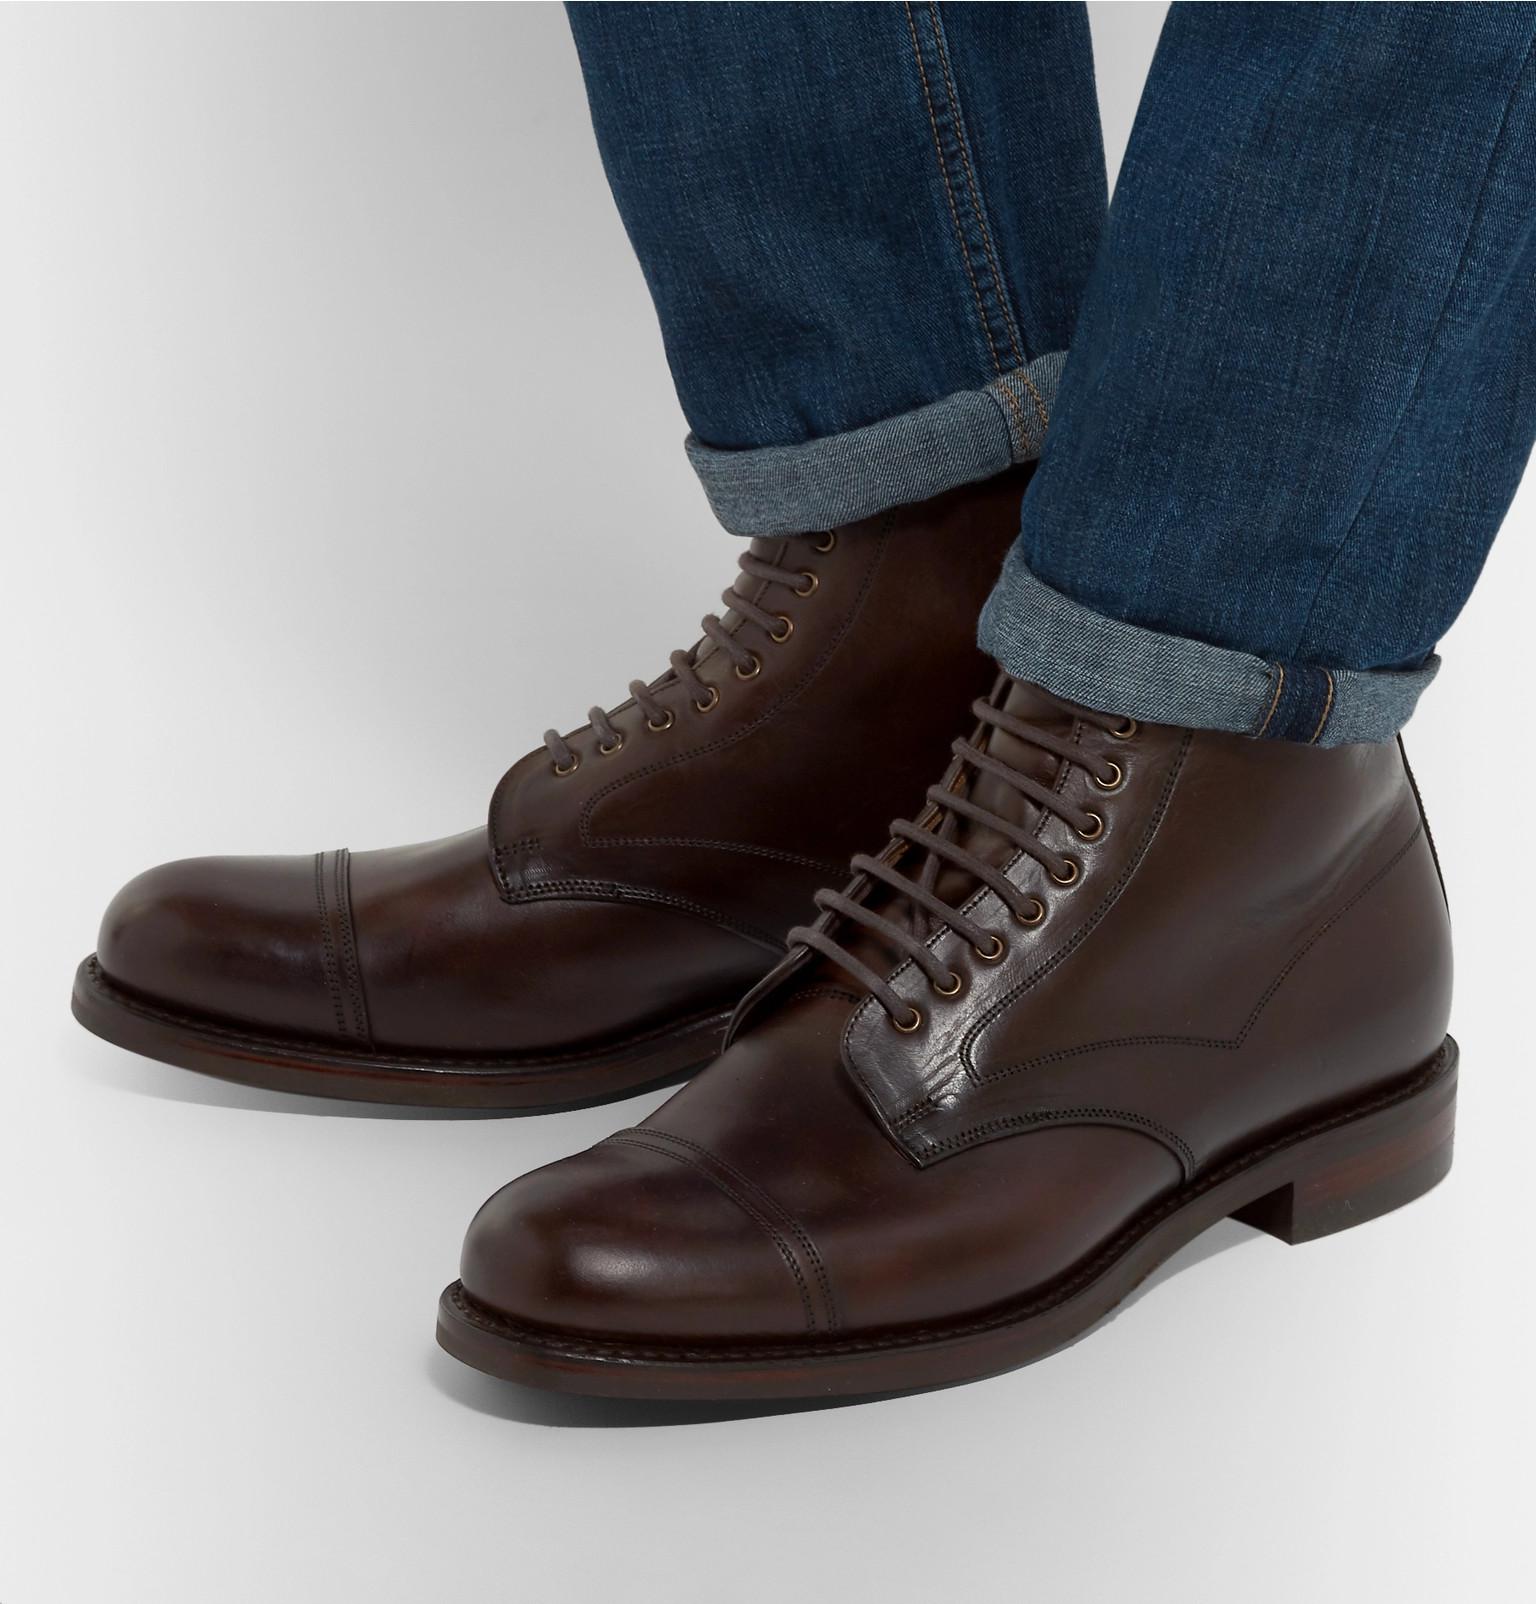 Buy > cheaney jarrow review > in stock